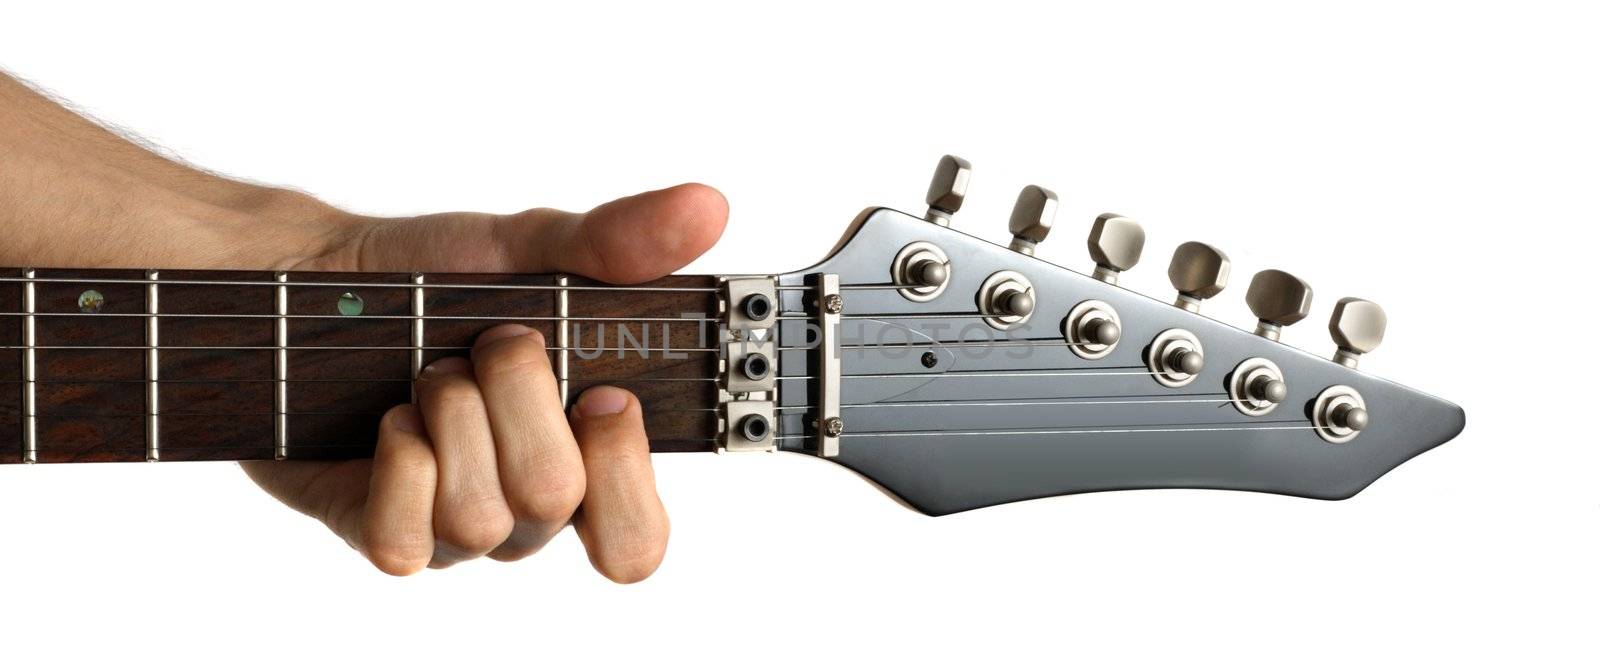 Hand fingering 'Am' chord on electric guitar, isolated on white background